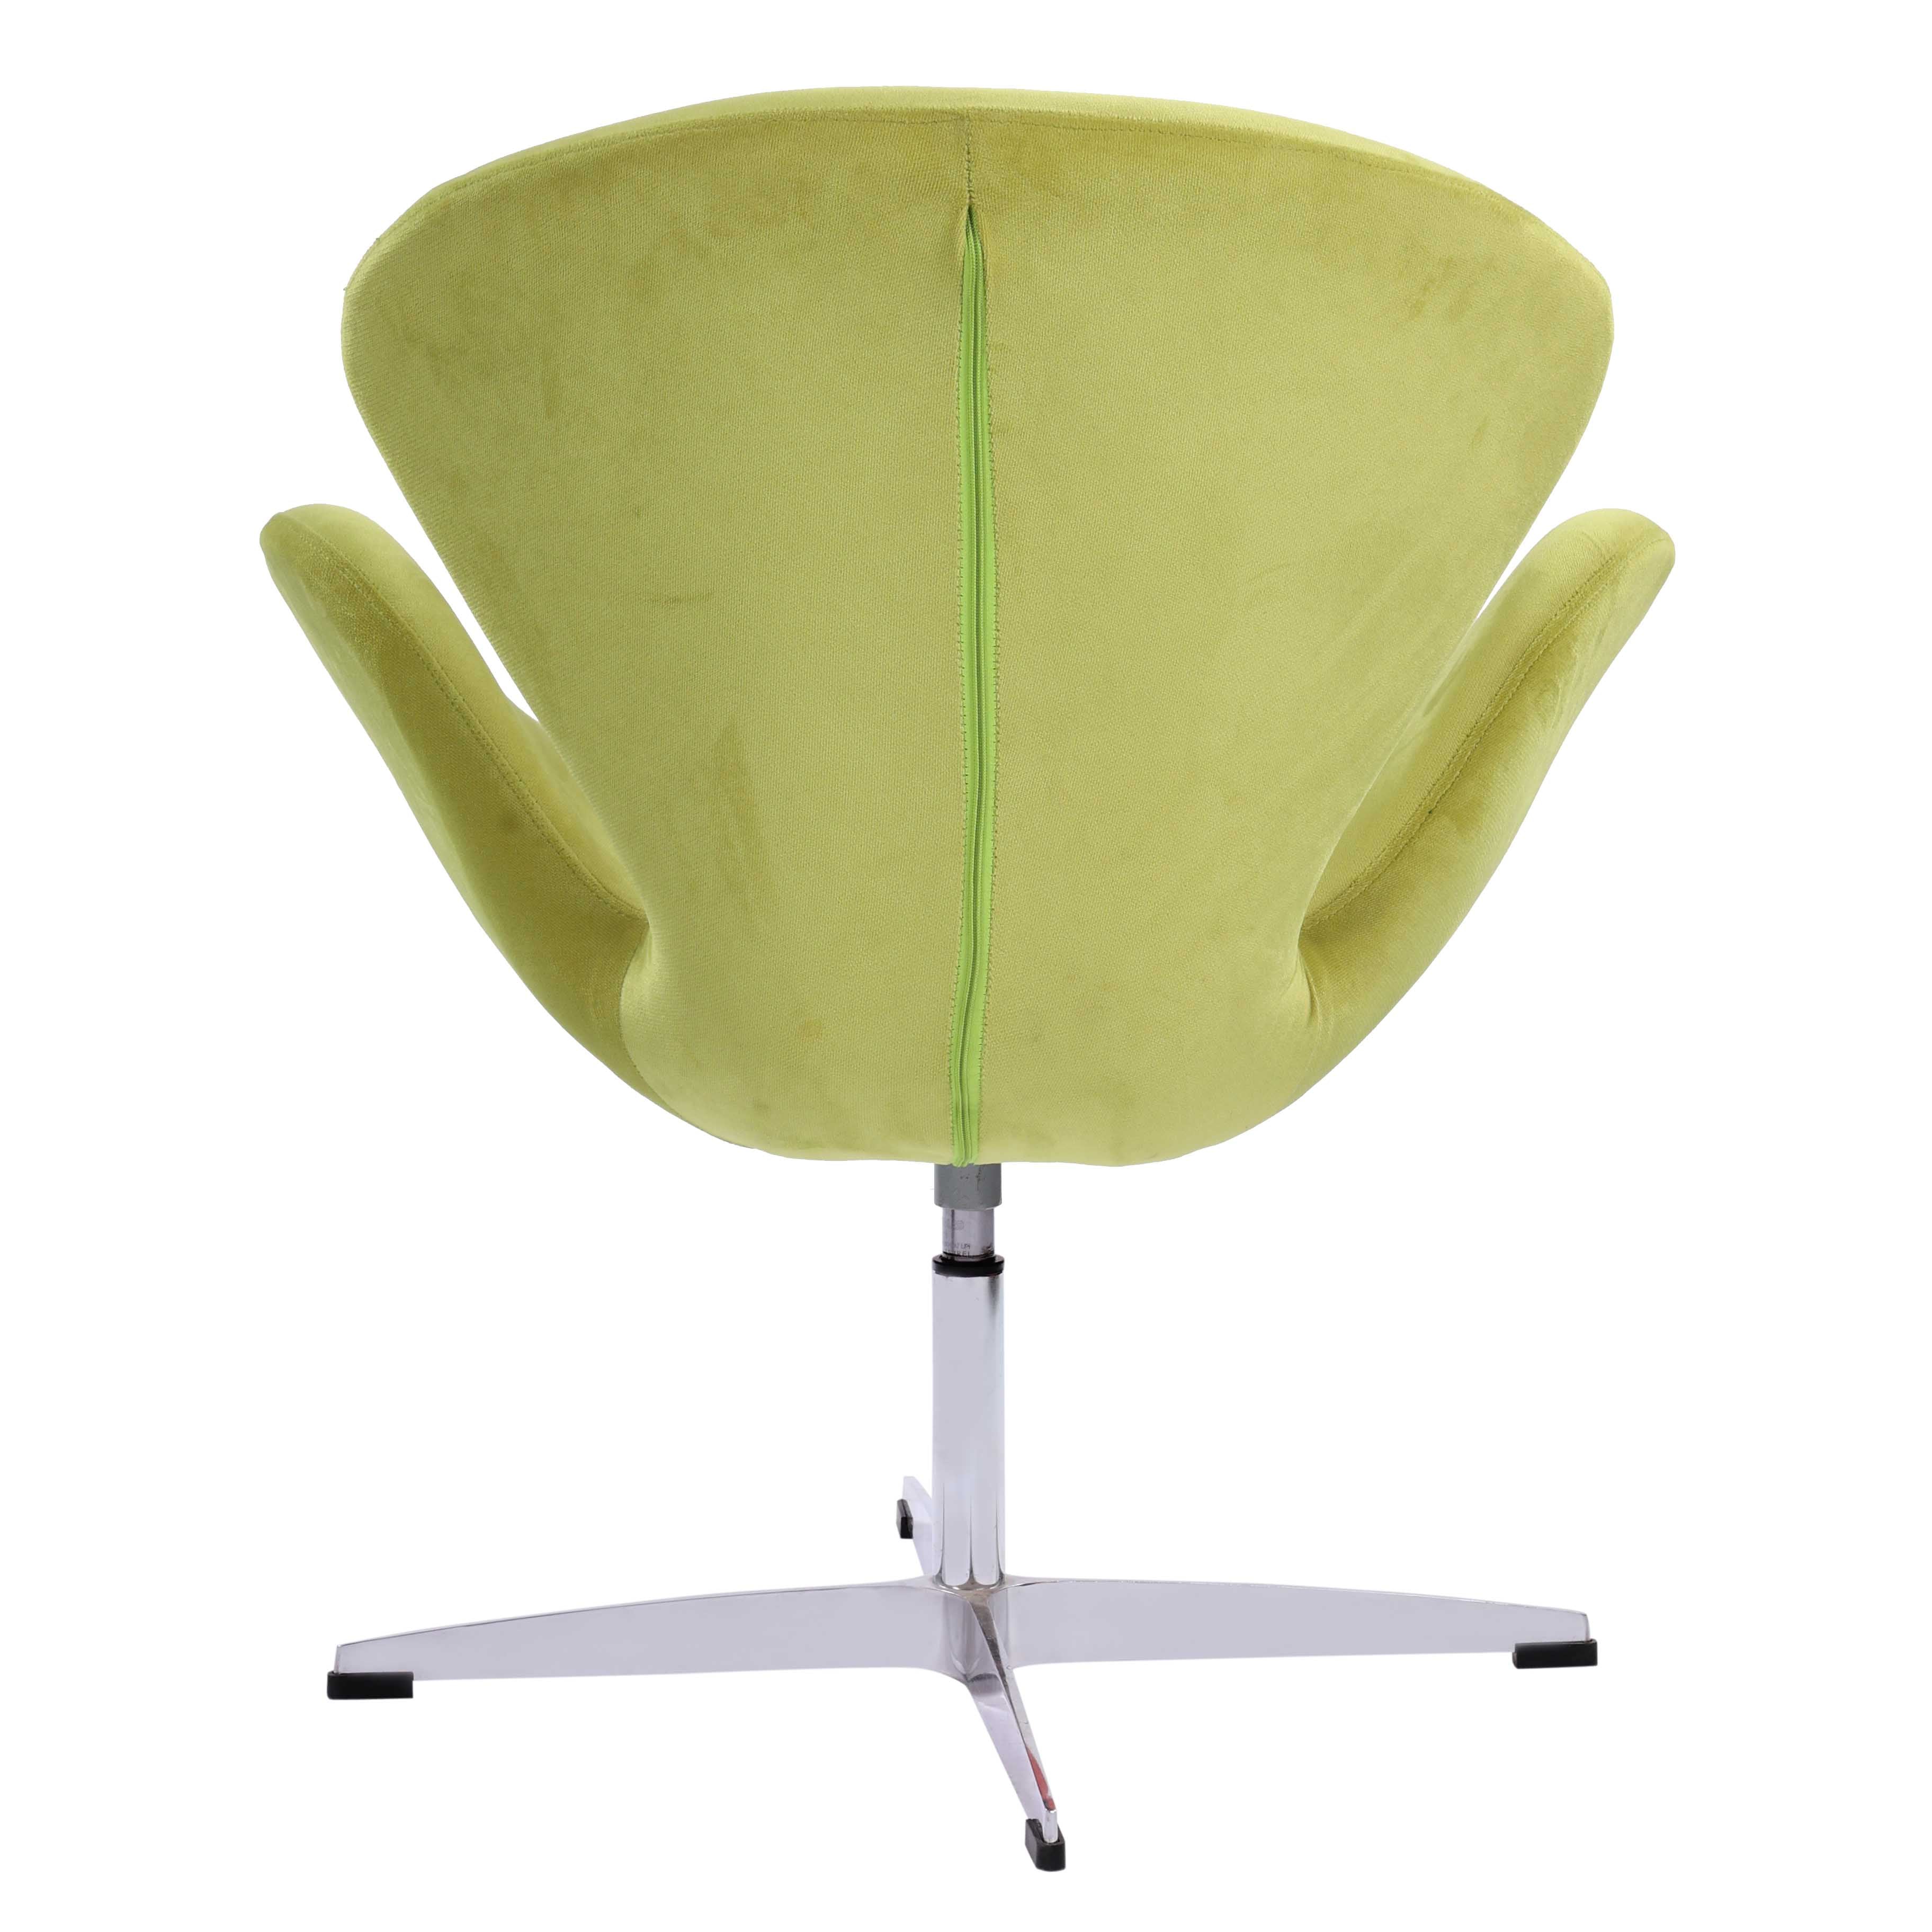 Siri Accent Fabric Upholstered Lounge Chair - Green Chair urbancart